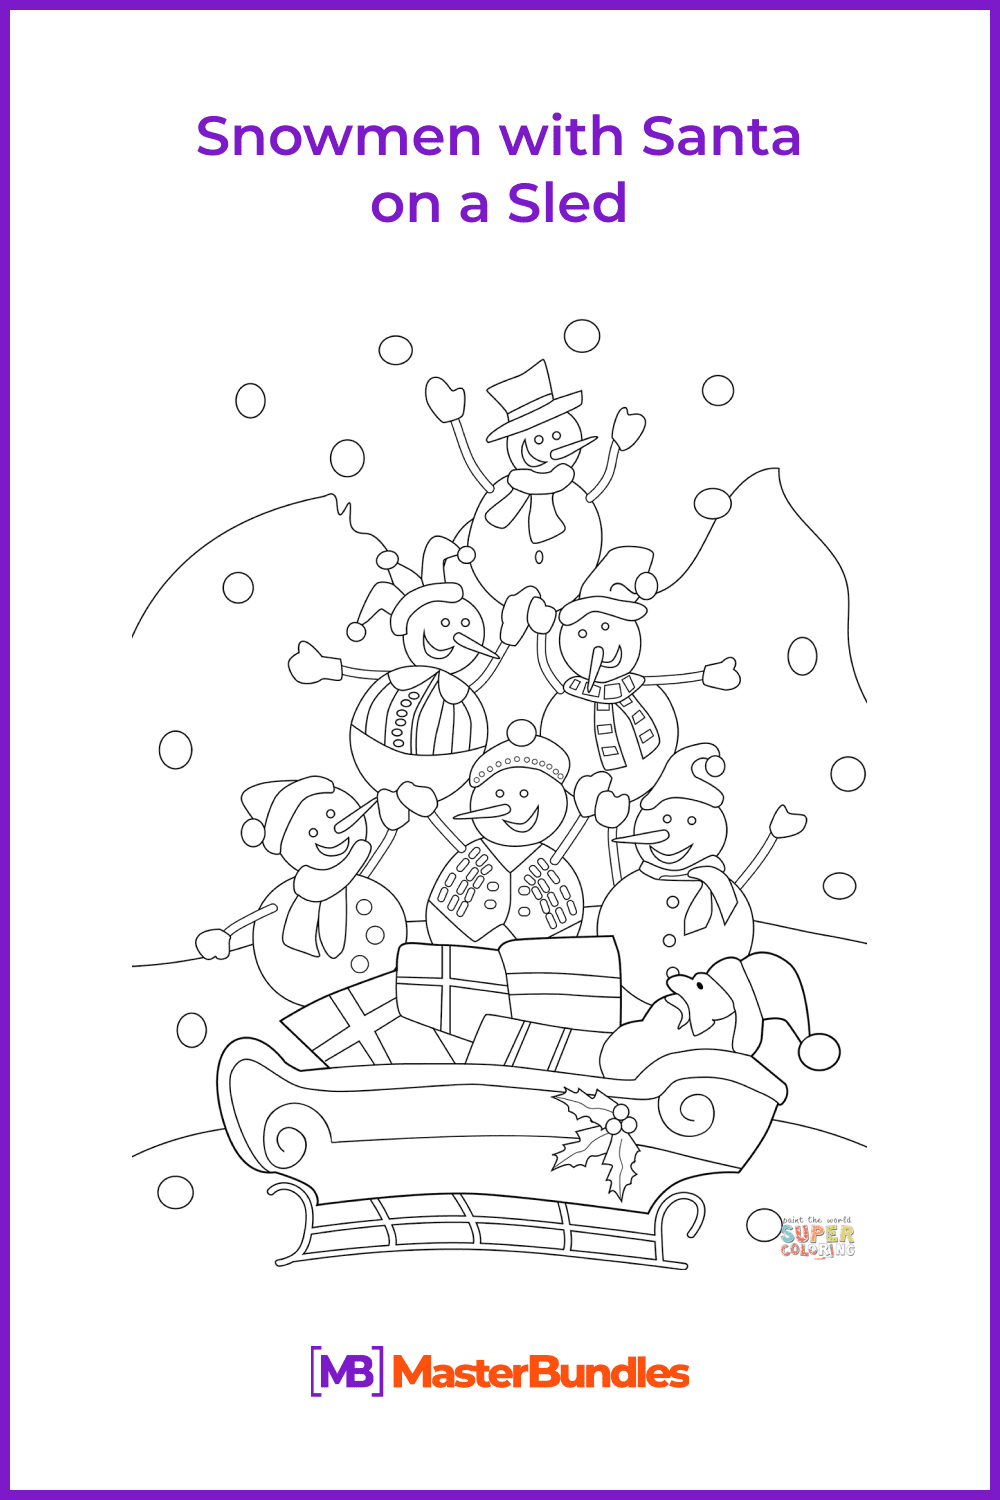 Snowmen with Santa on a Sled coloring page pinterest image.